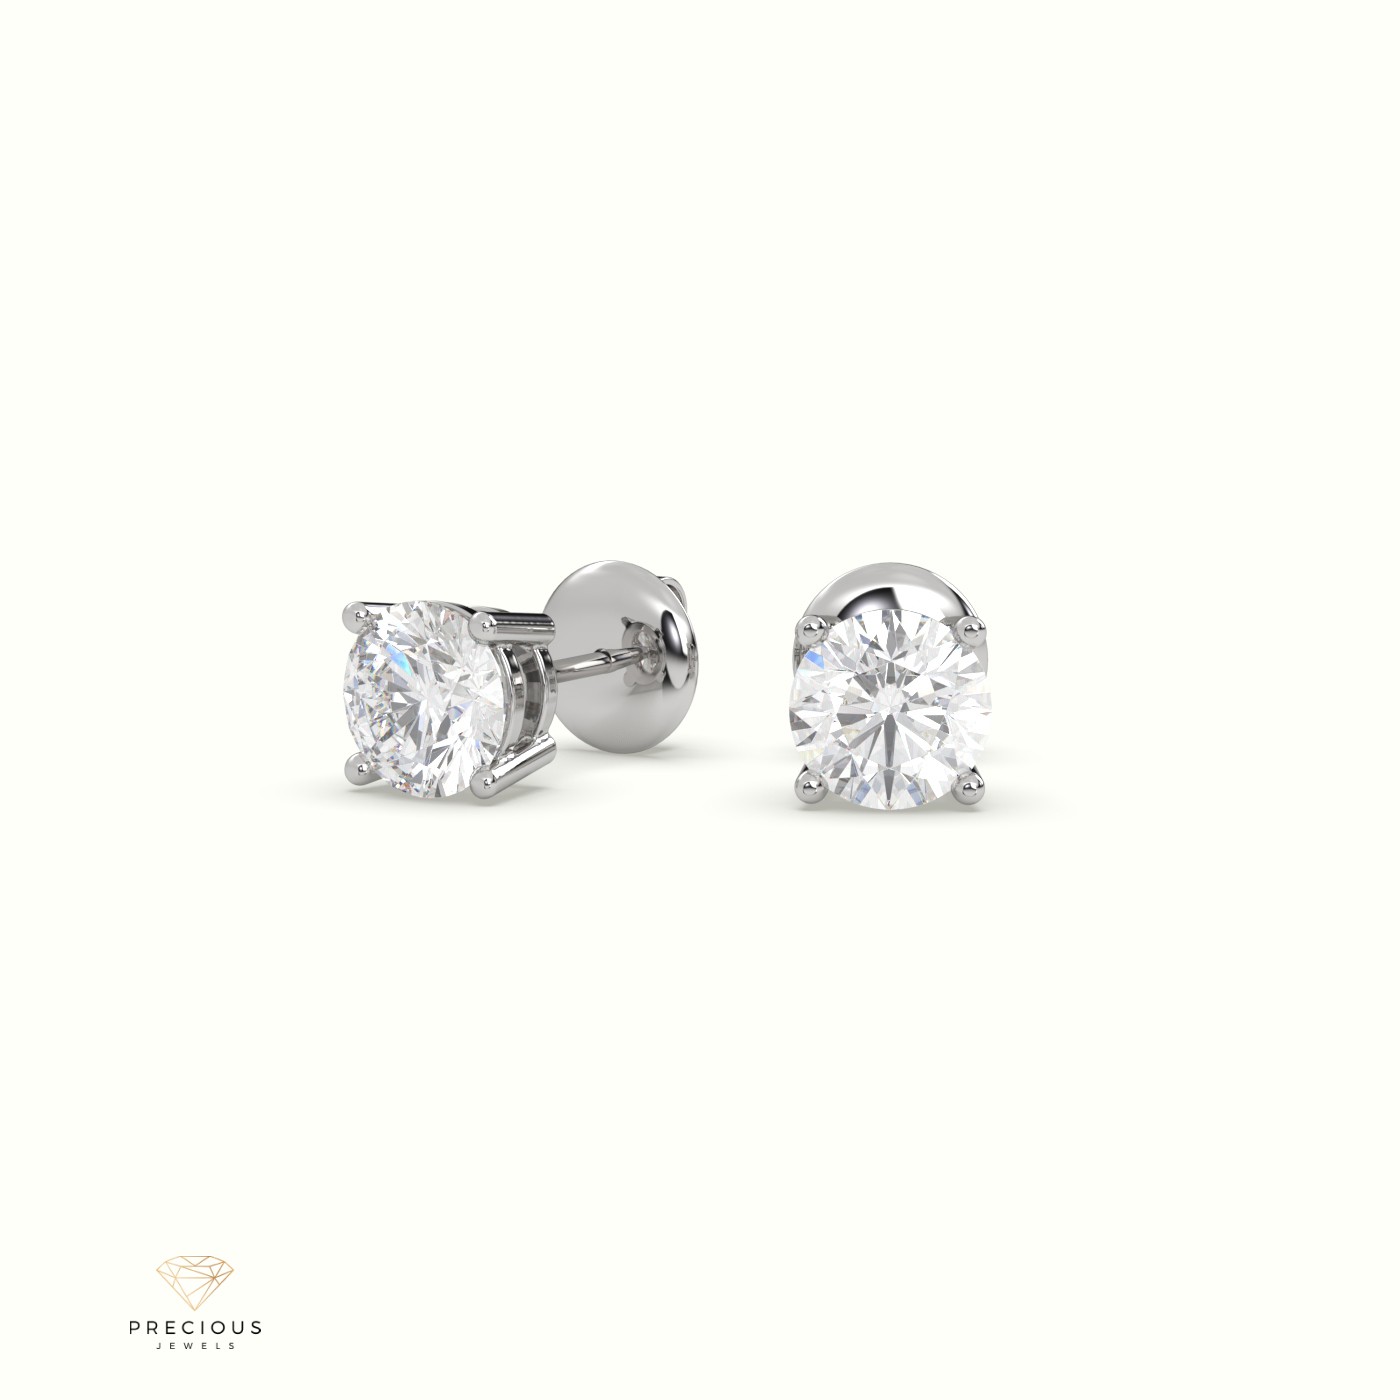 18k white gold  4 prongs classic round diamond earring studs Photos & images